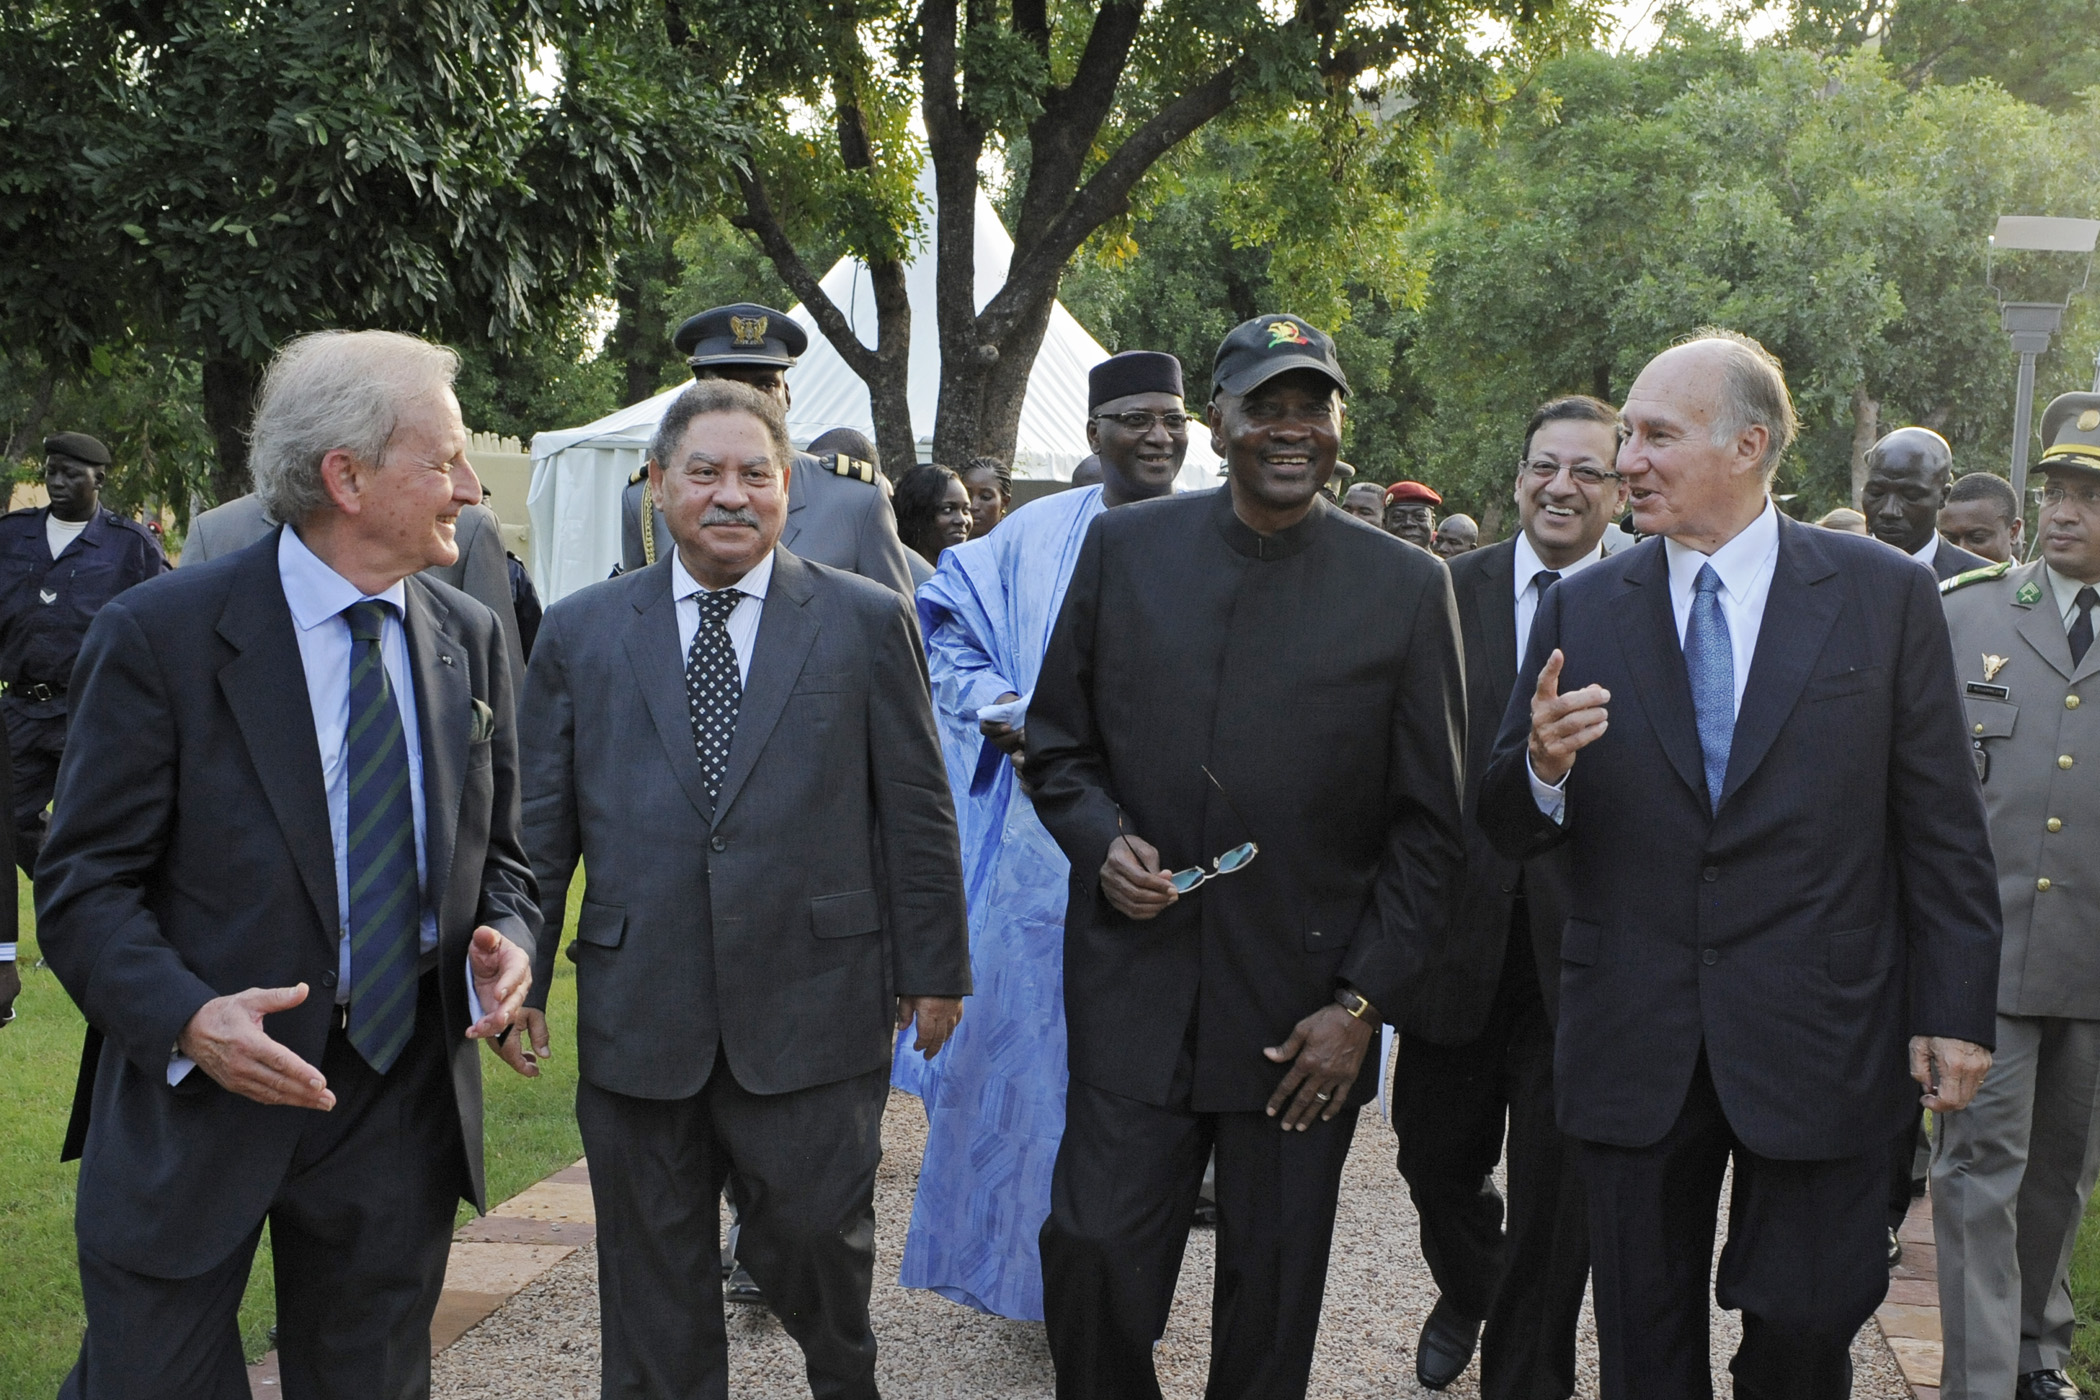 Luis Monreal, General Manager of the Aga Khan Trust for Culture escorts President Fradique de Menezes of Sao Tome and Principe, President Amadou Toumani Touré of Mali and Mawlana Hazar Imam around the National Park of Mali following the Opening Ceremony. Photo: AKDN / Gary Otte